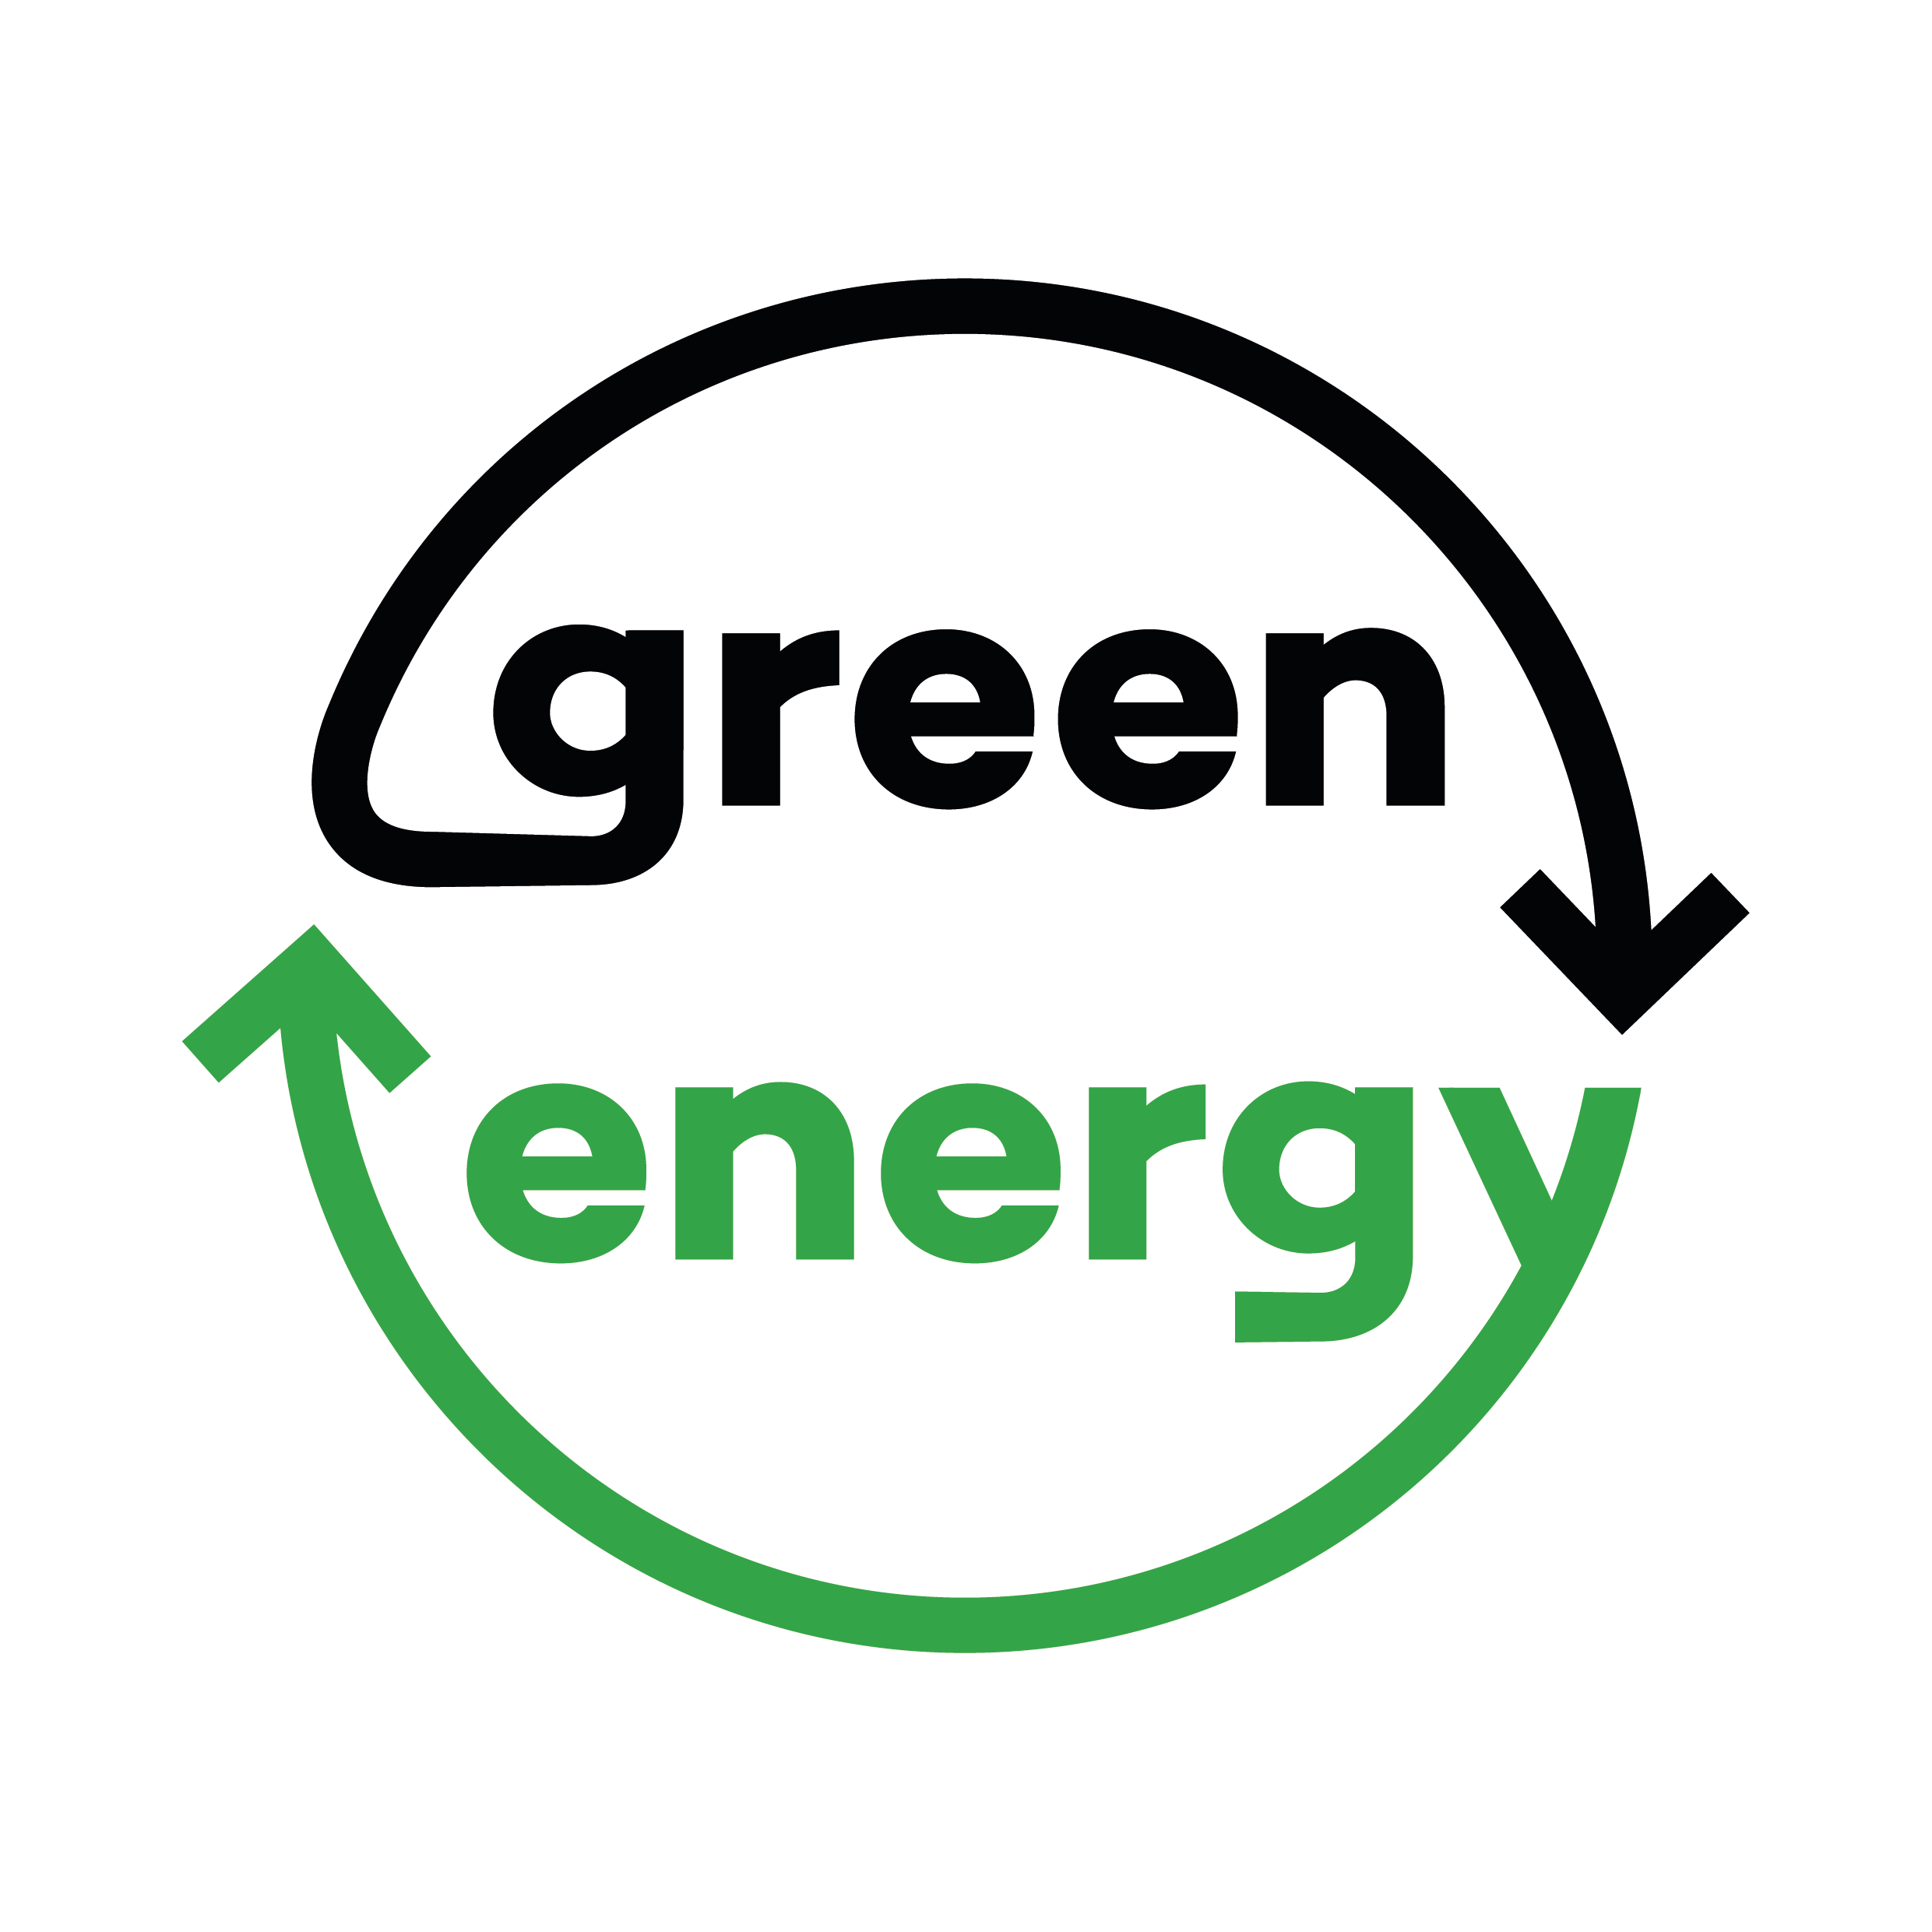 Green Energy PNG Image